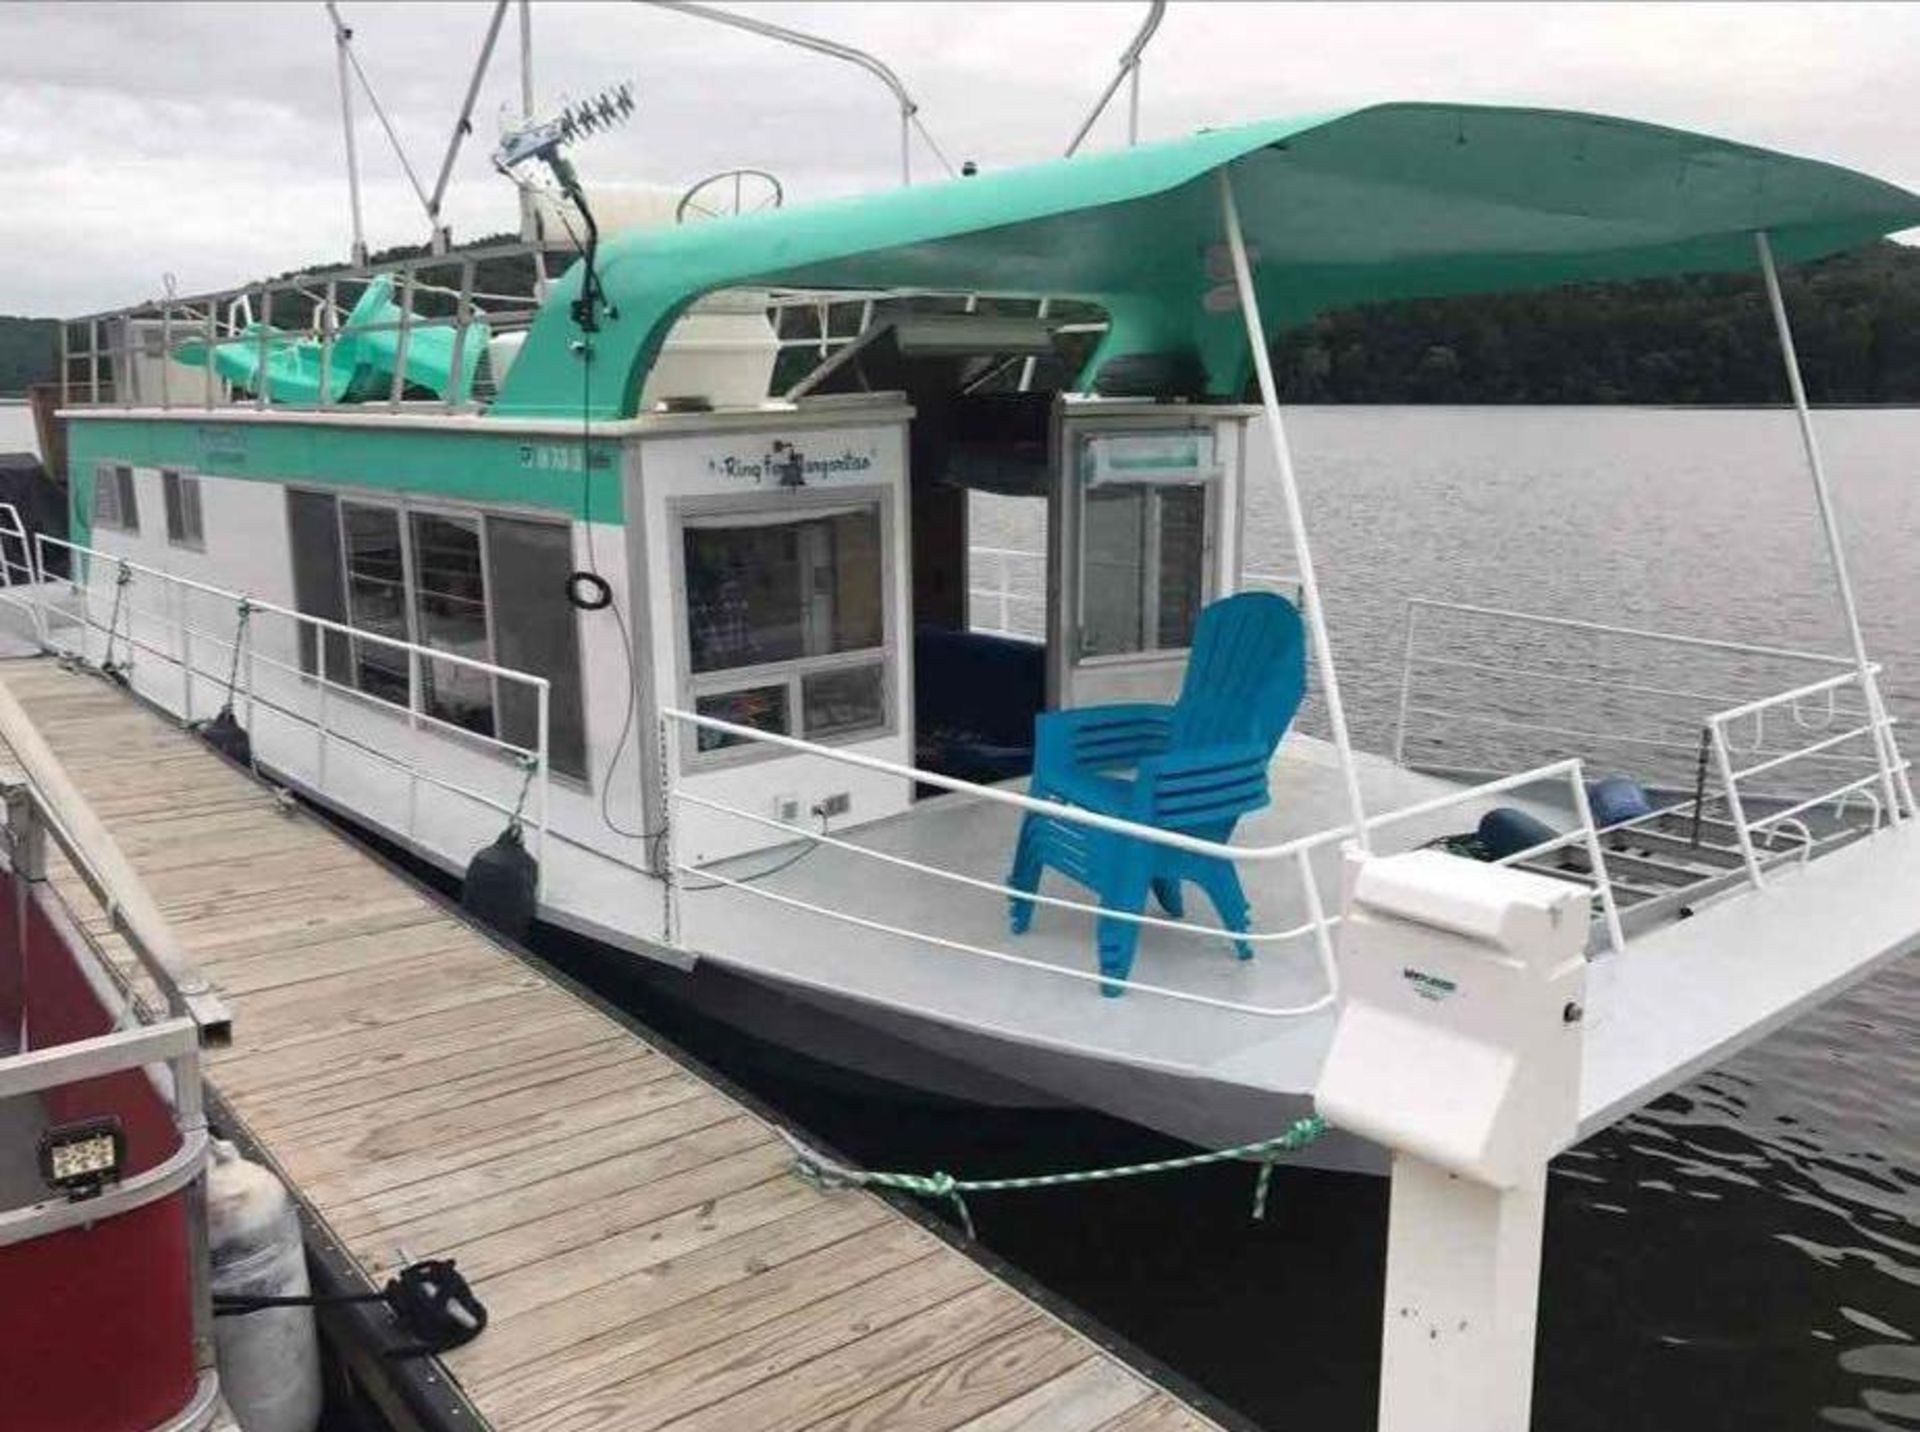 House Boat-More info coming soon - Image 11 of 60